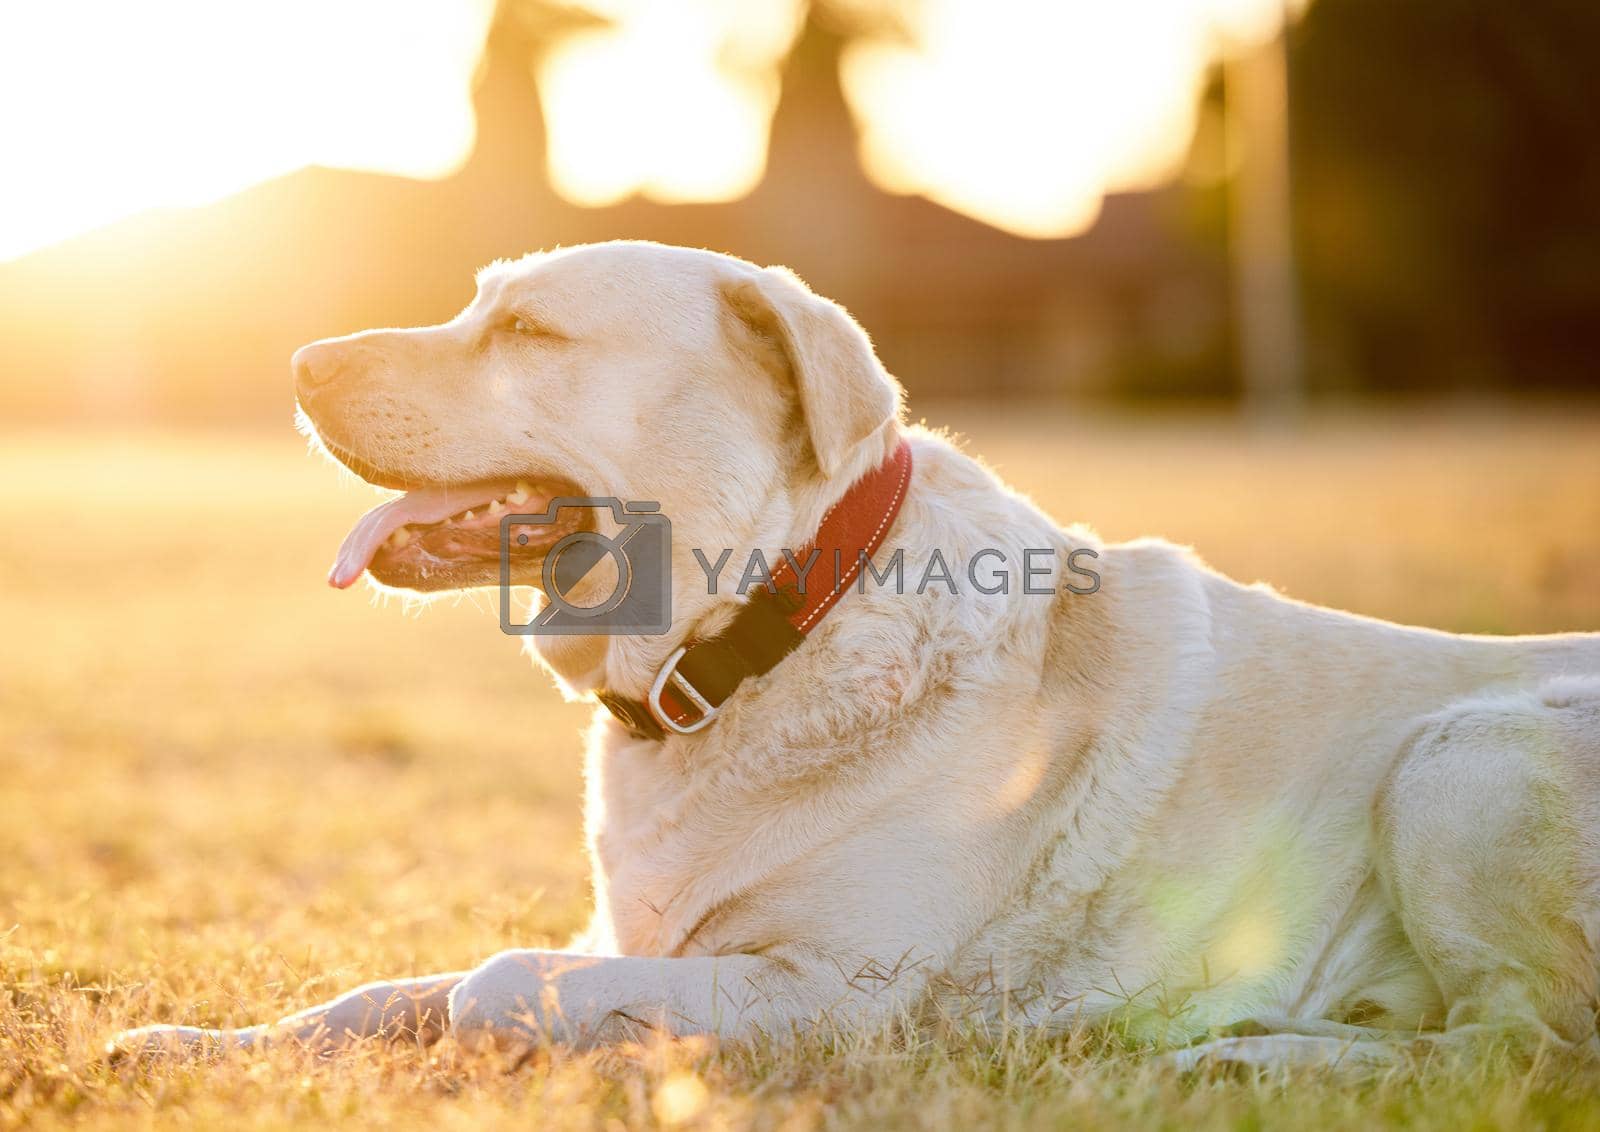 Royalty free image of Everybody loves a labrador. Shot of an adorable dog relaxing on the grass in a park. by YuriArcurs